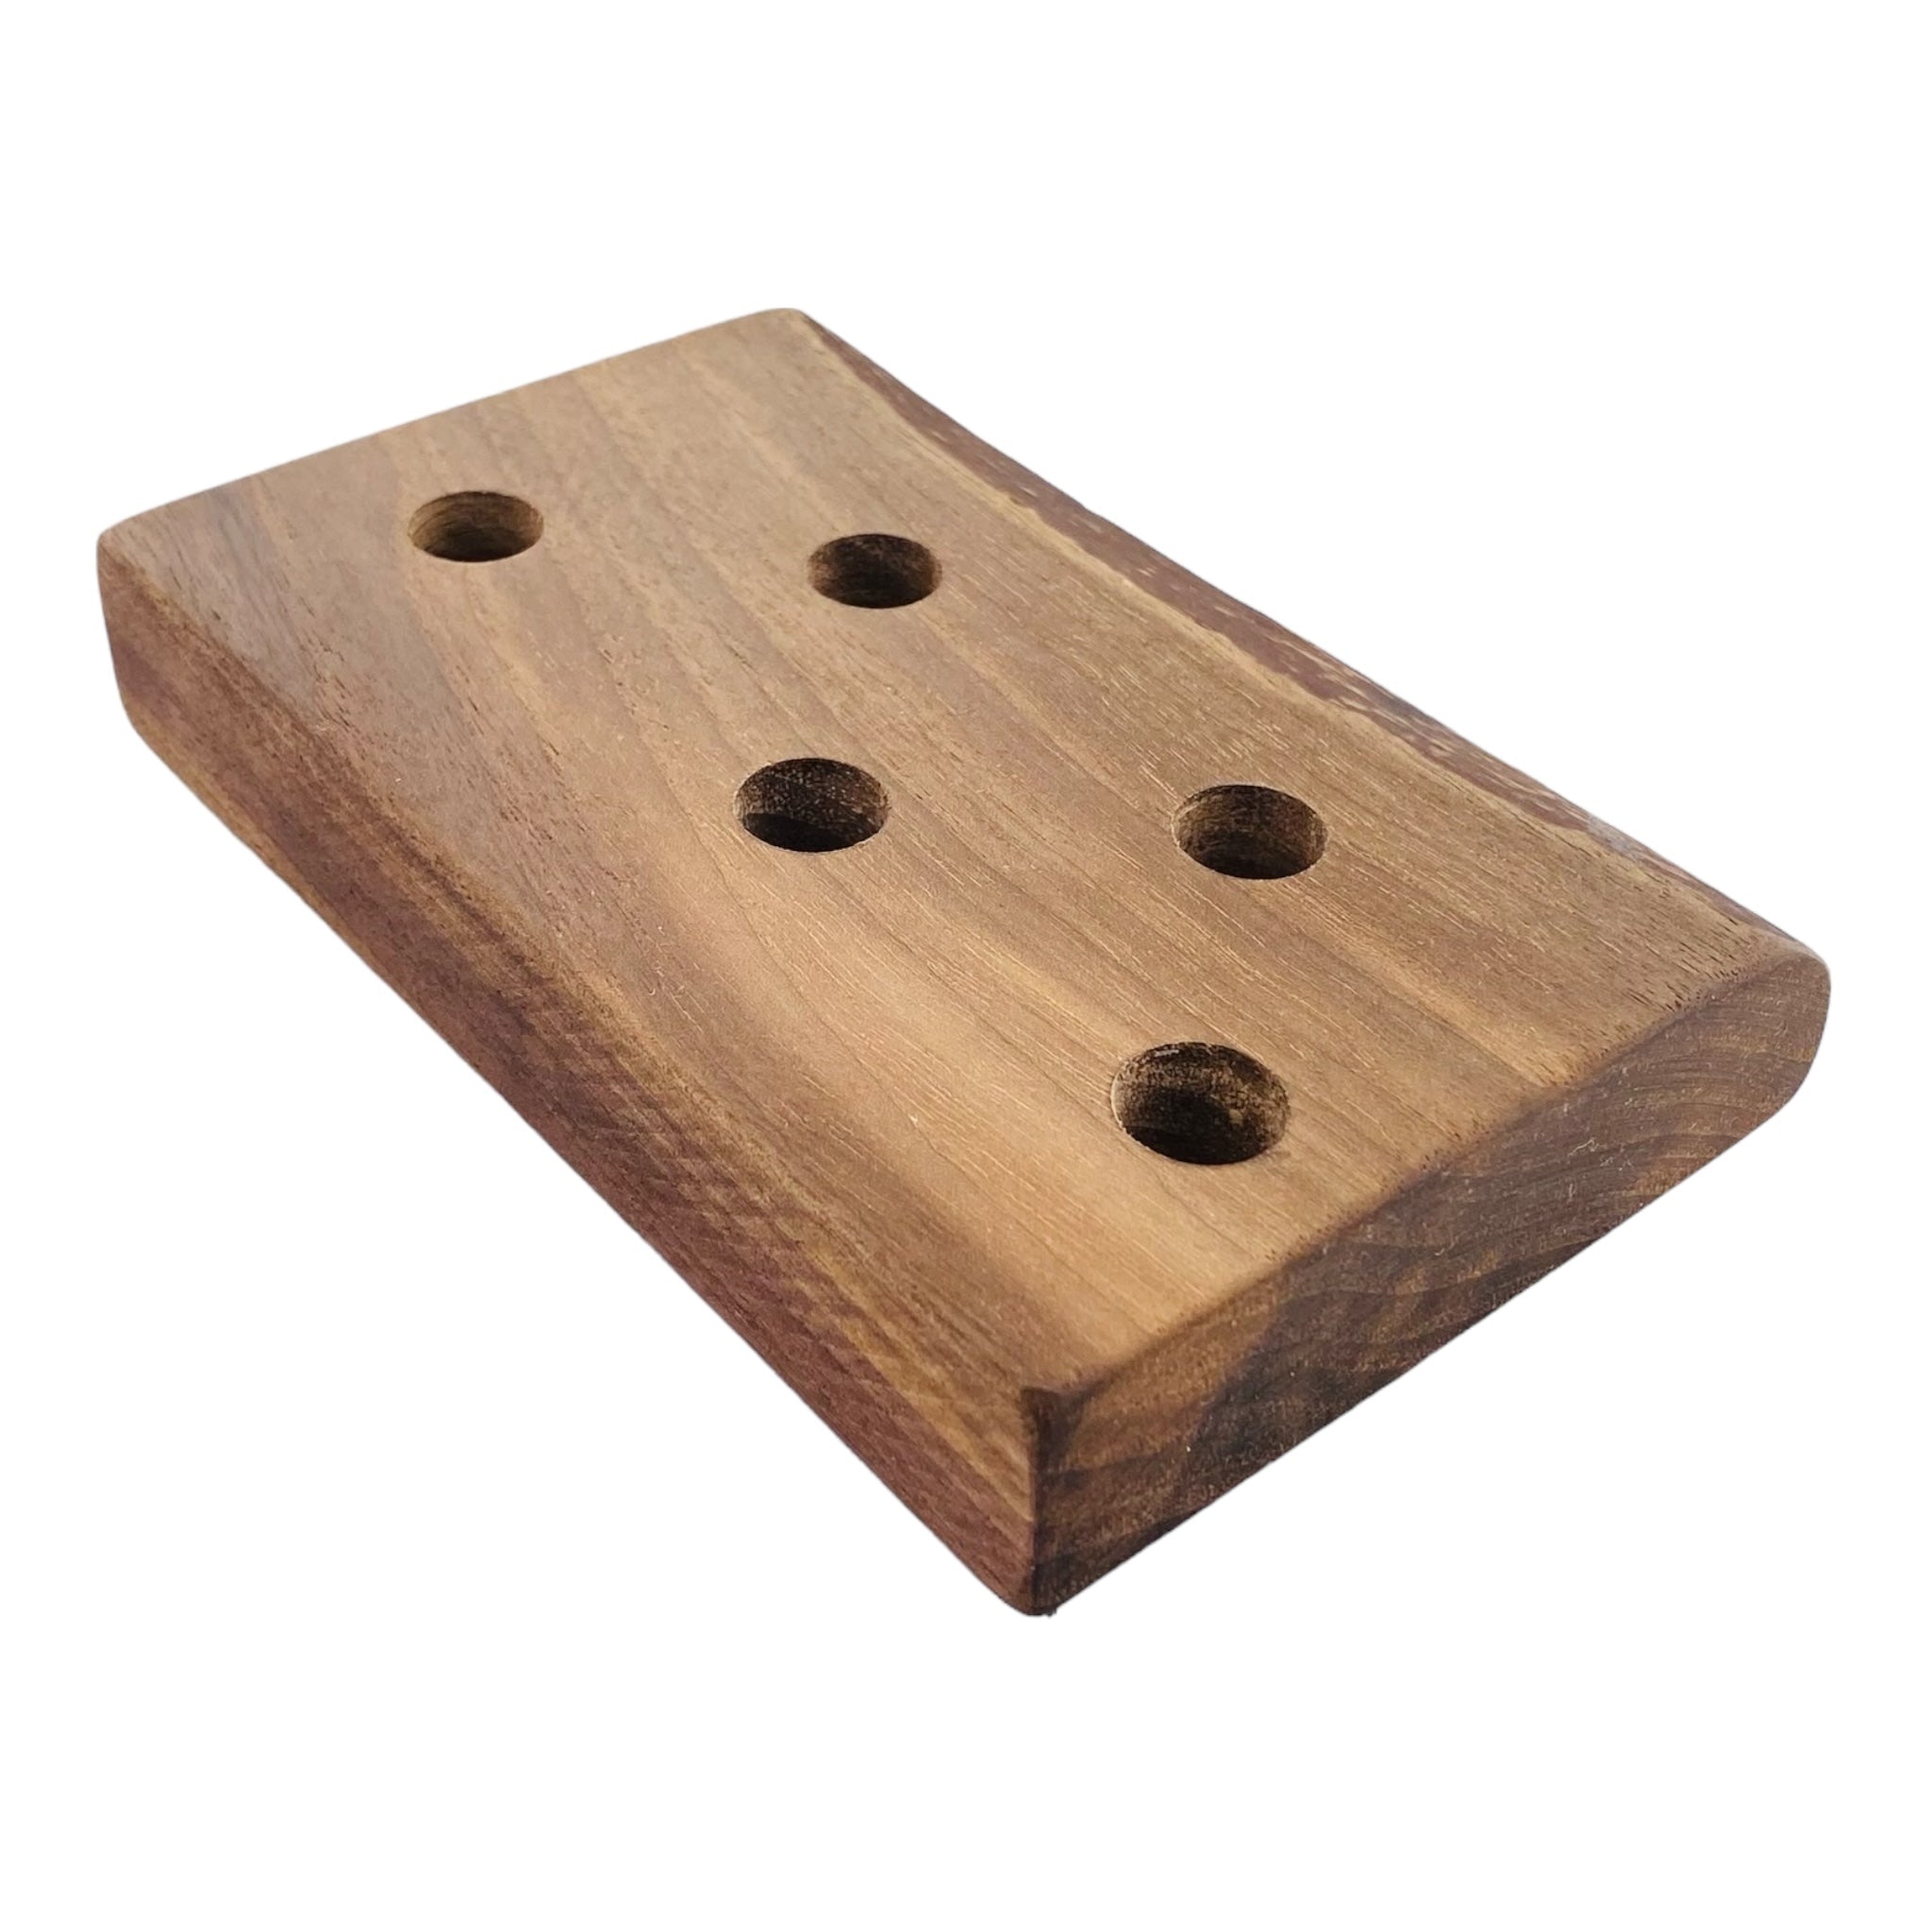 5 Hole Wood Display Stand Holder For 14mm Bong Bowl Pieces Or Quartz Bangers - Black Walnut